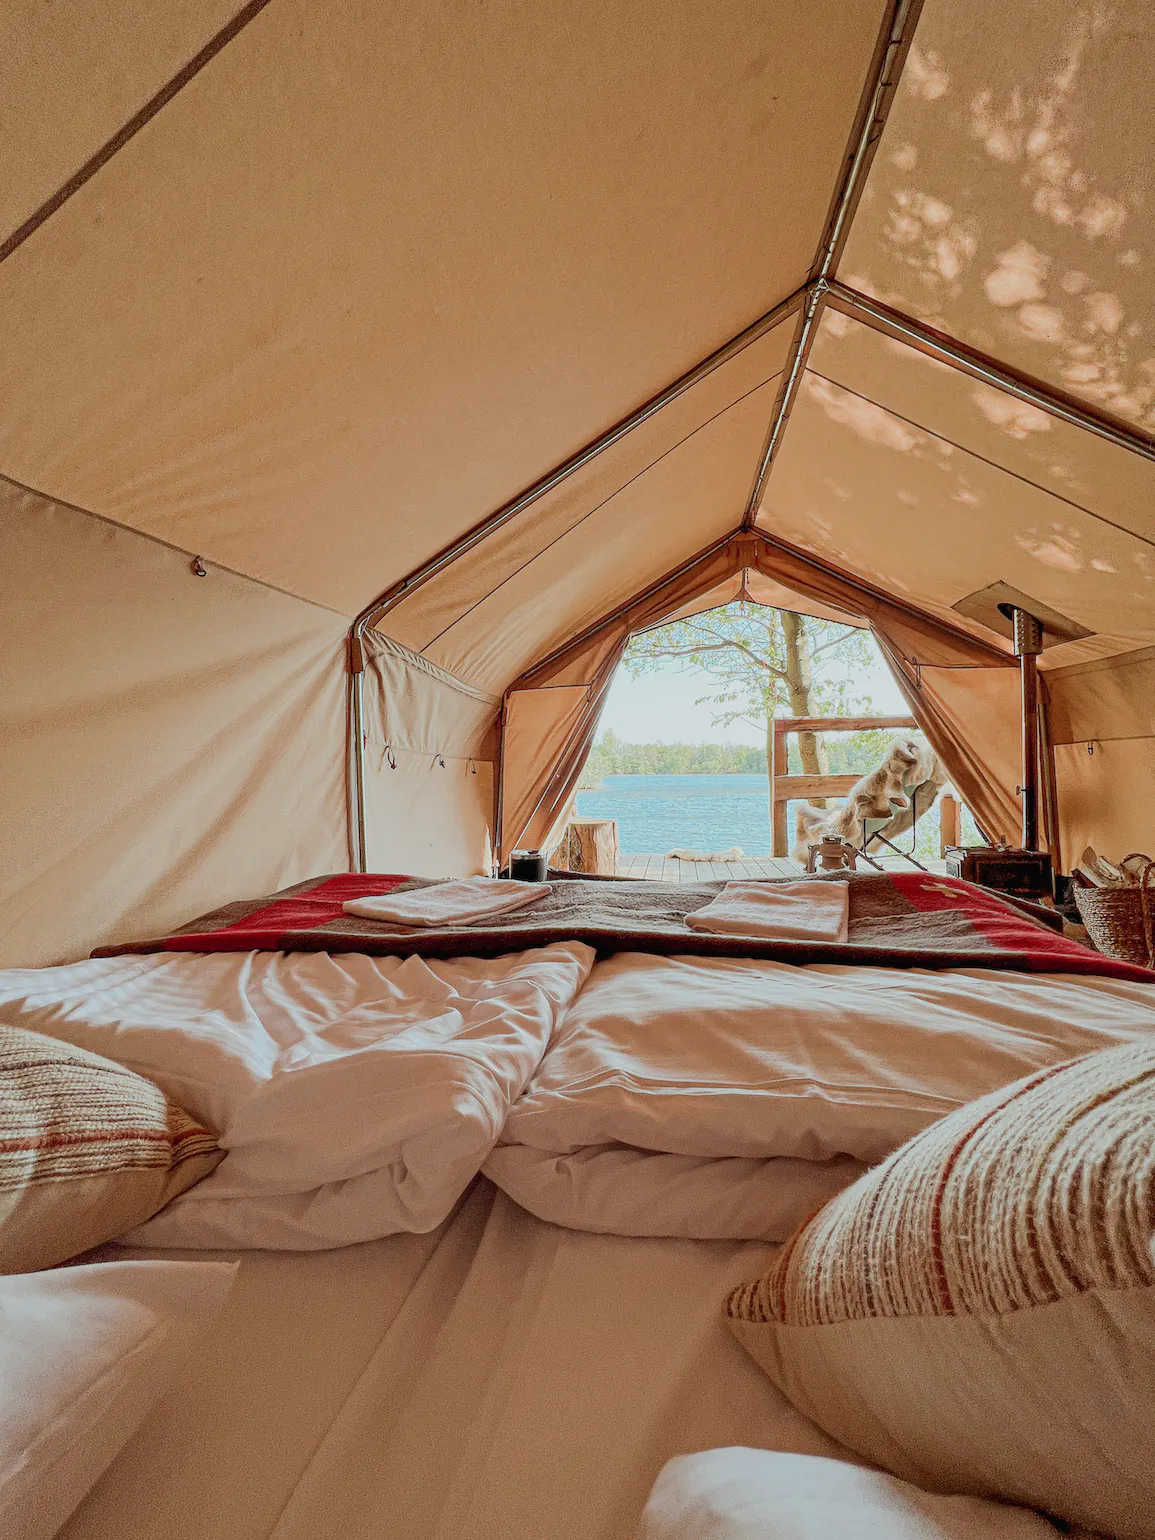 What to pack for a glamping trip